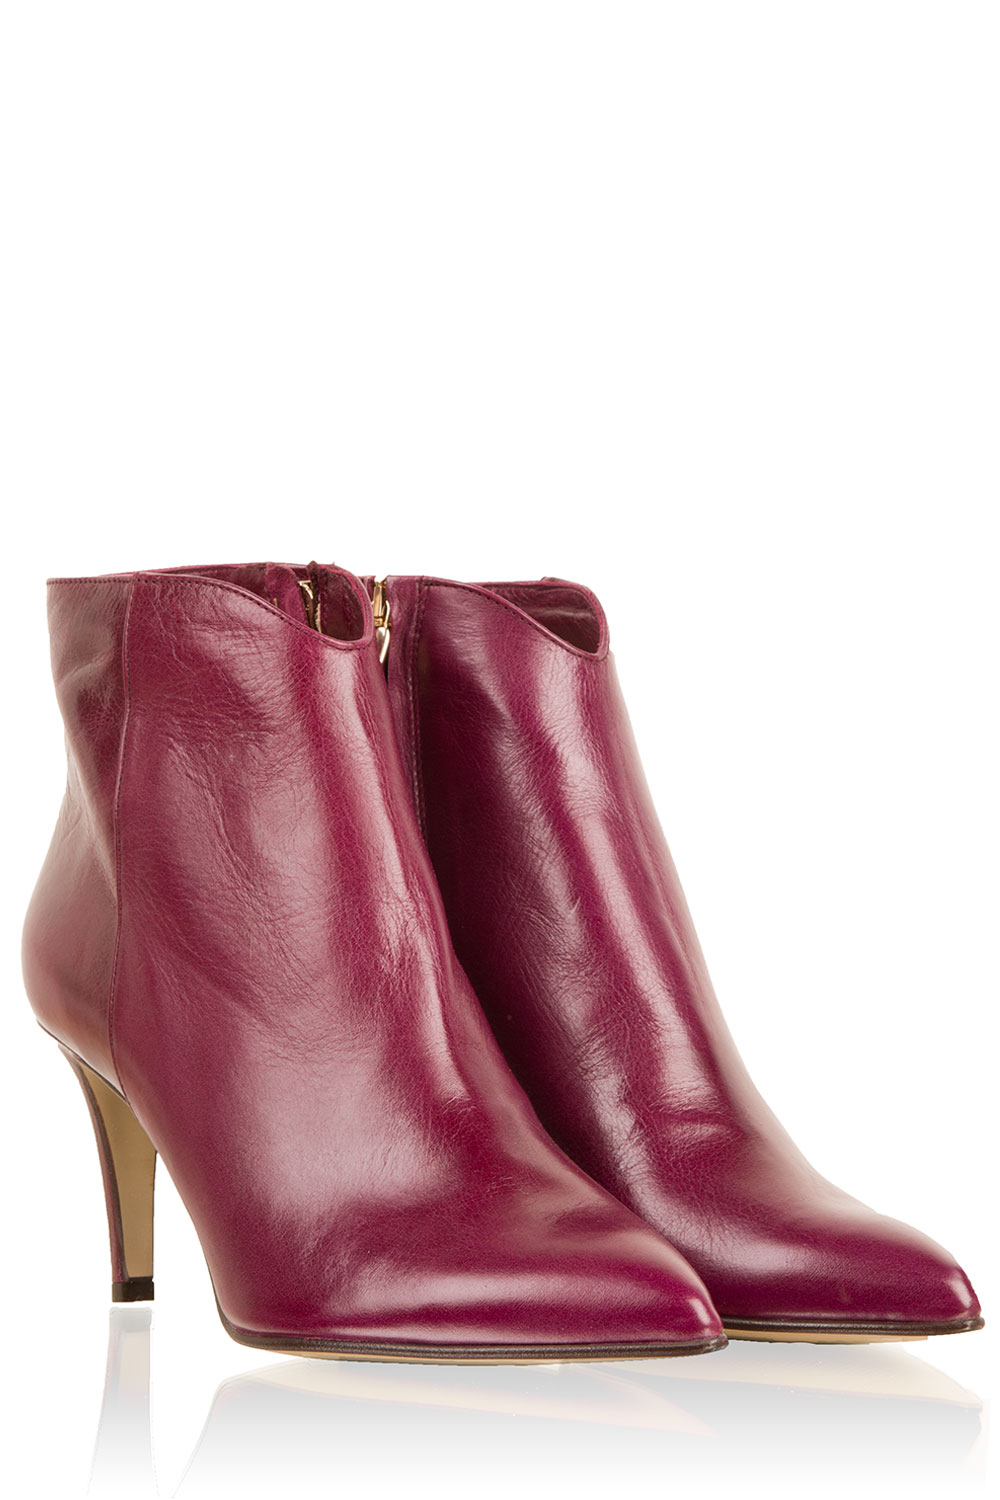 little burgundy ankle boots